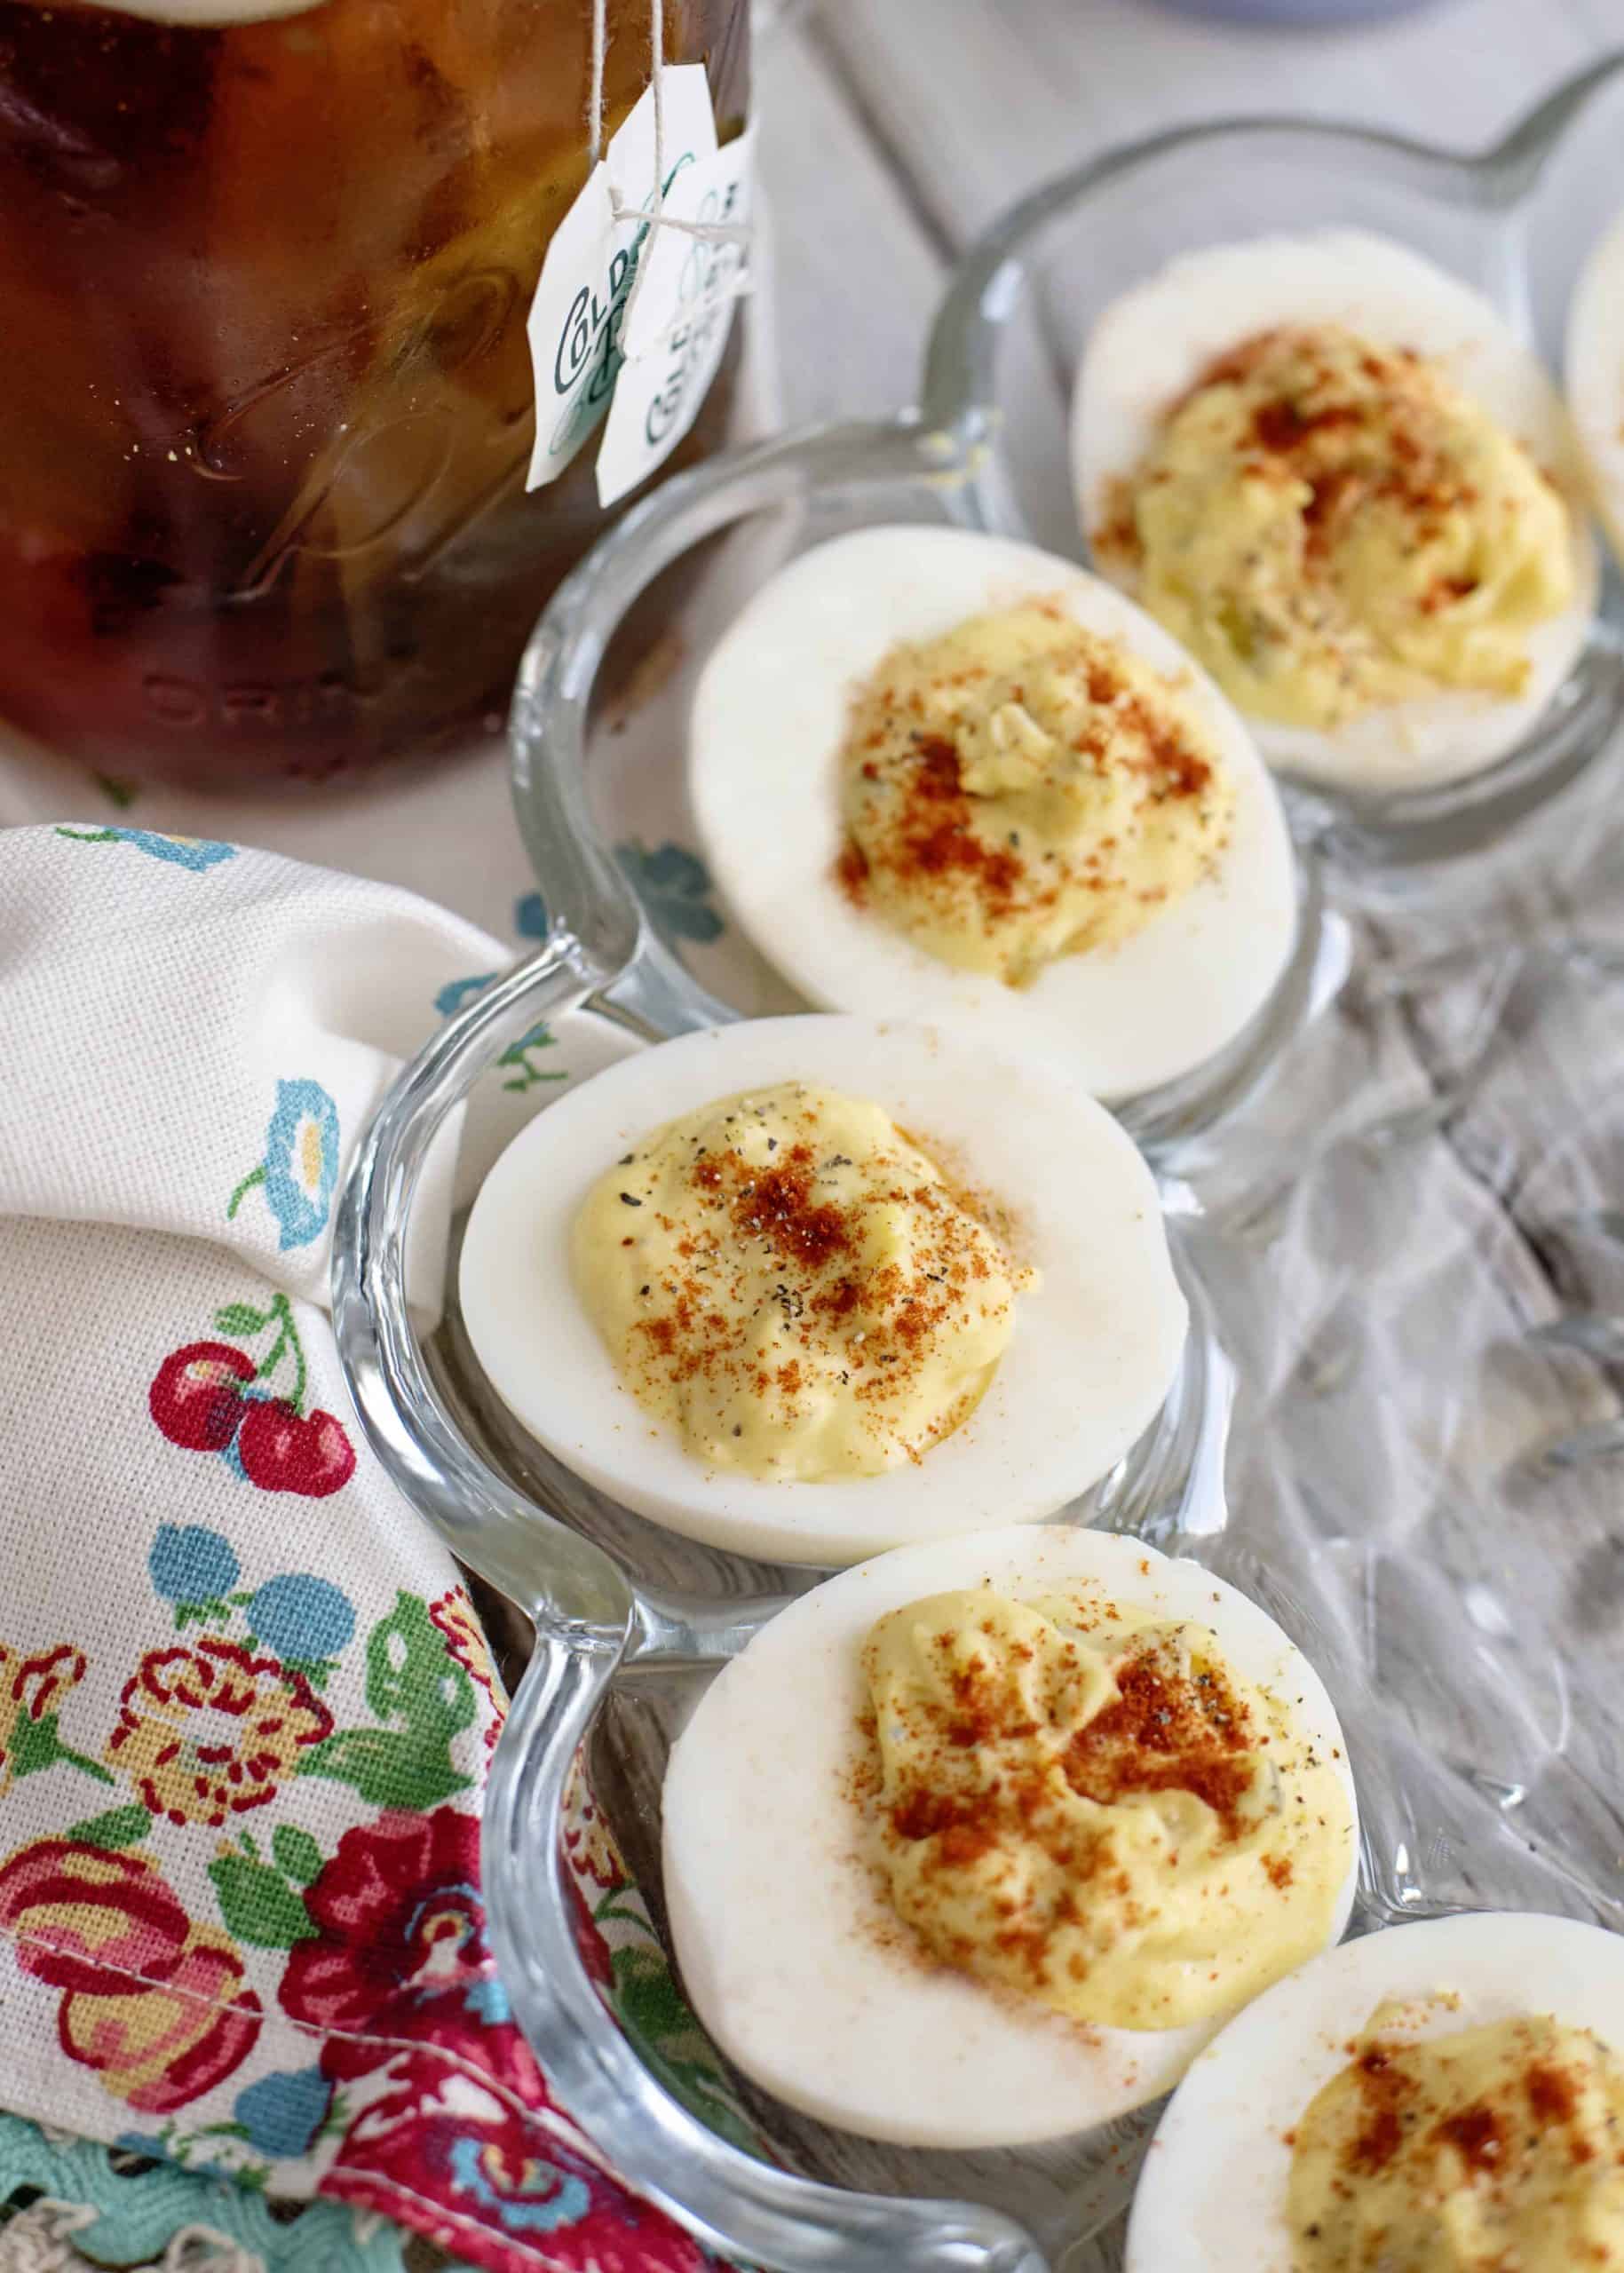 Plate of Southern deviled eggs (summer recipes).